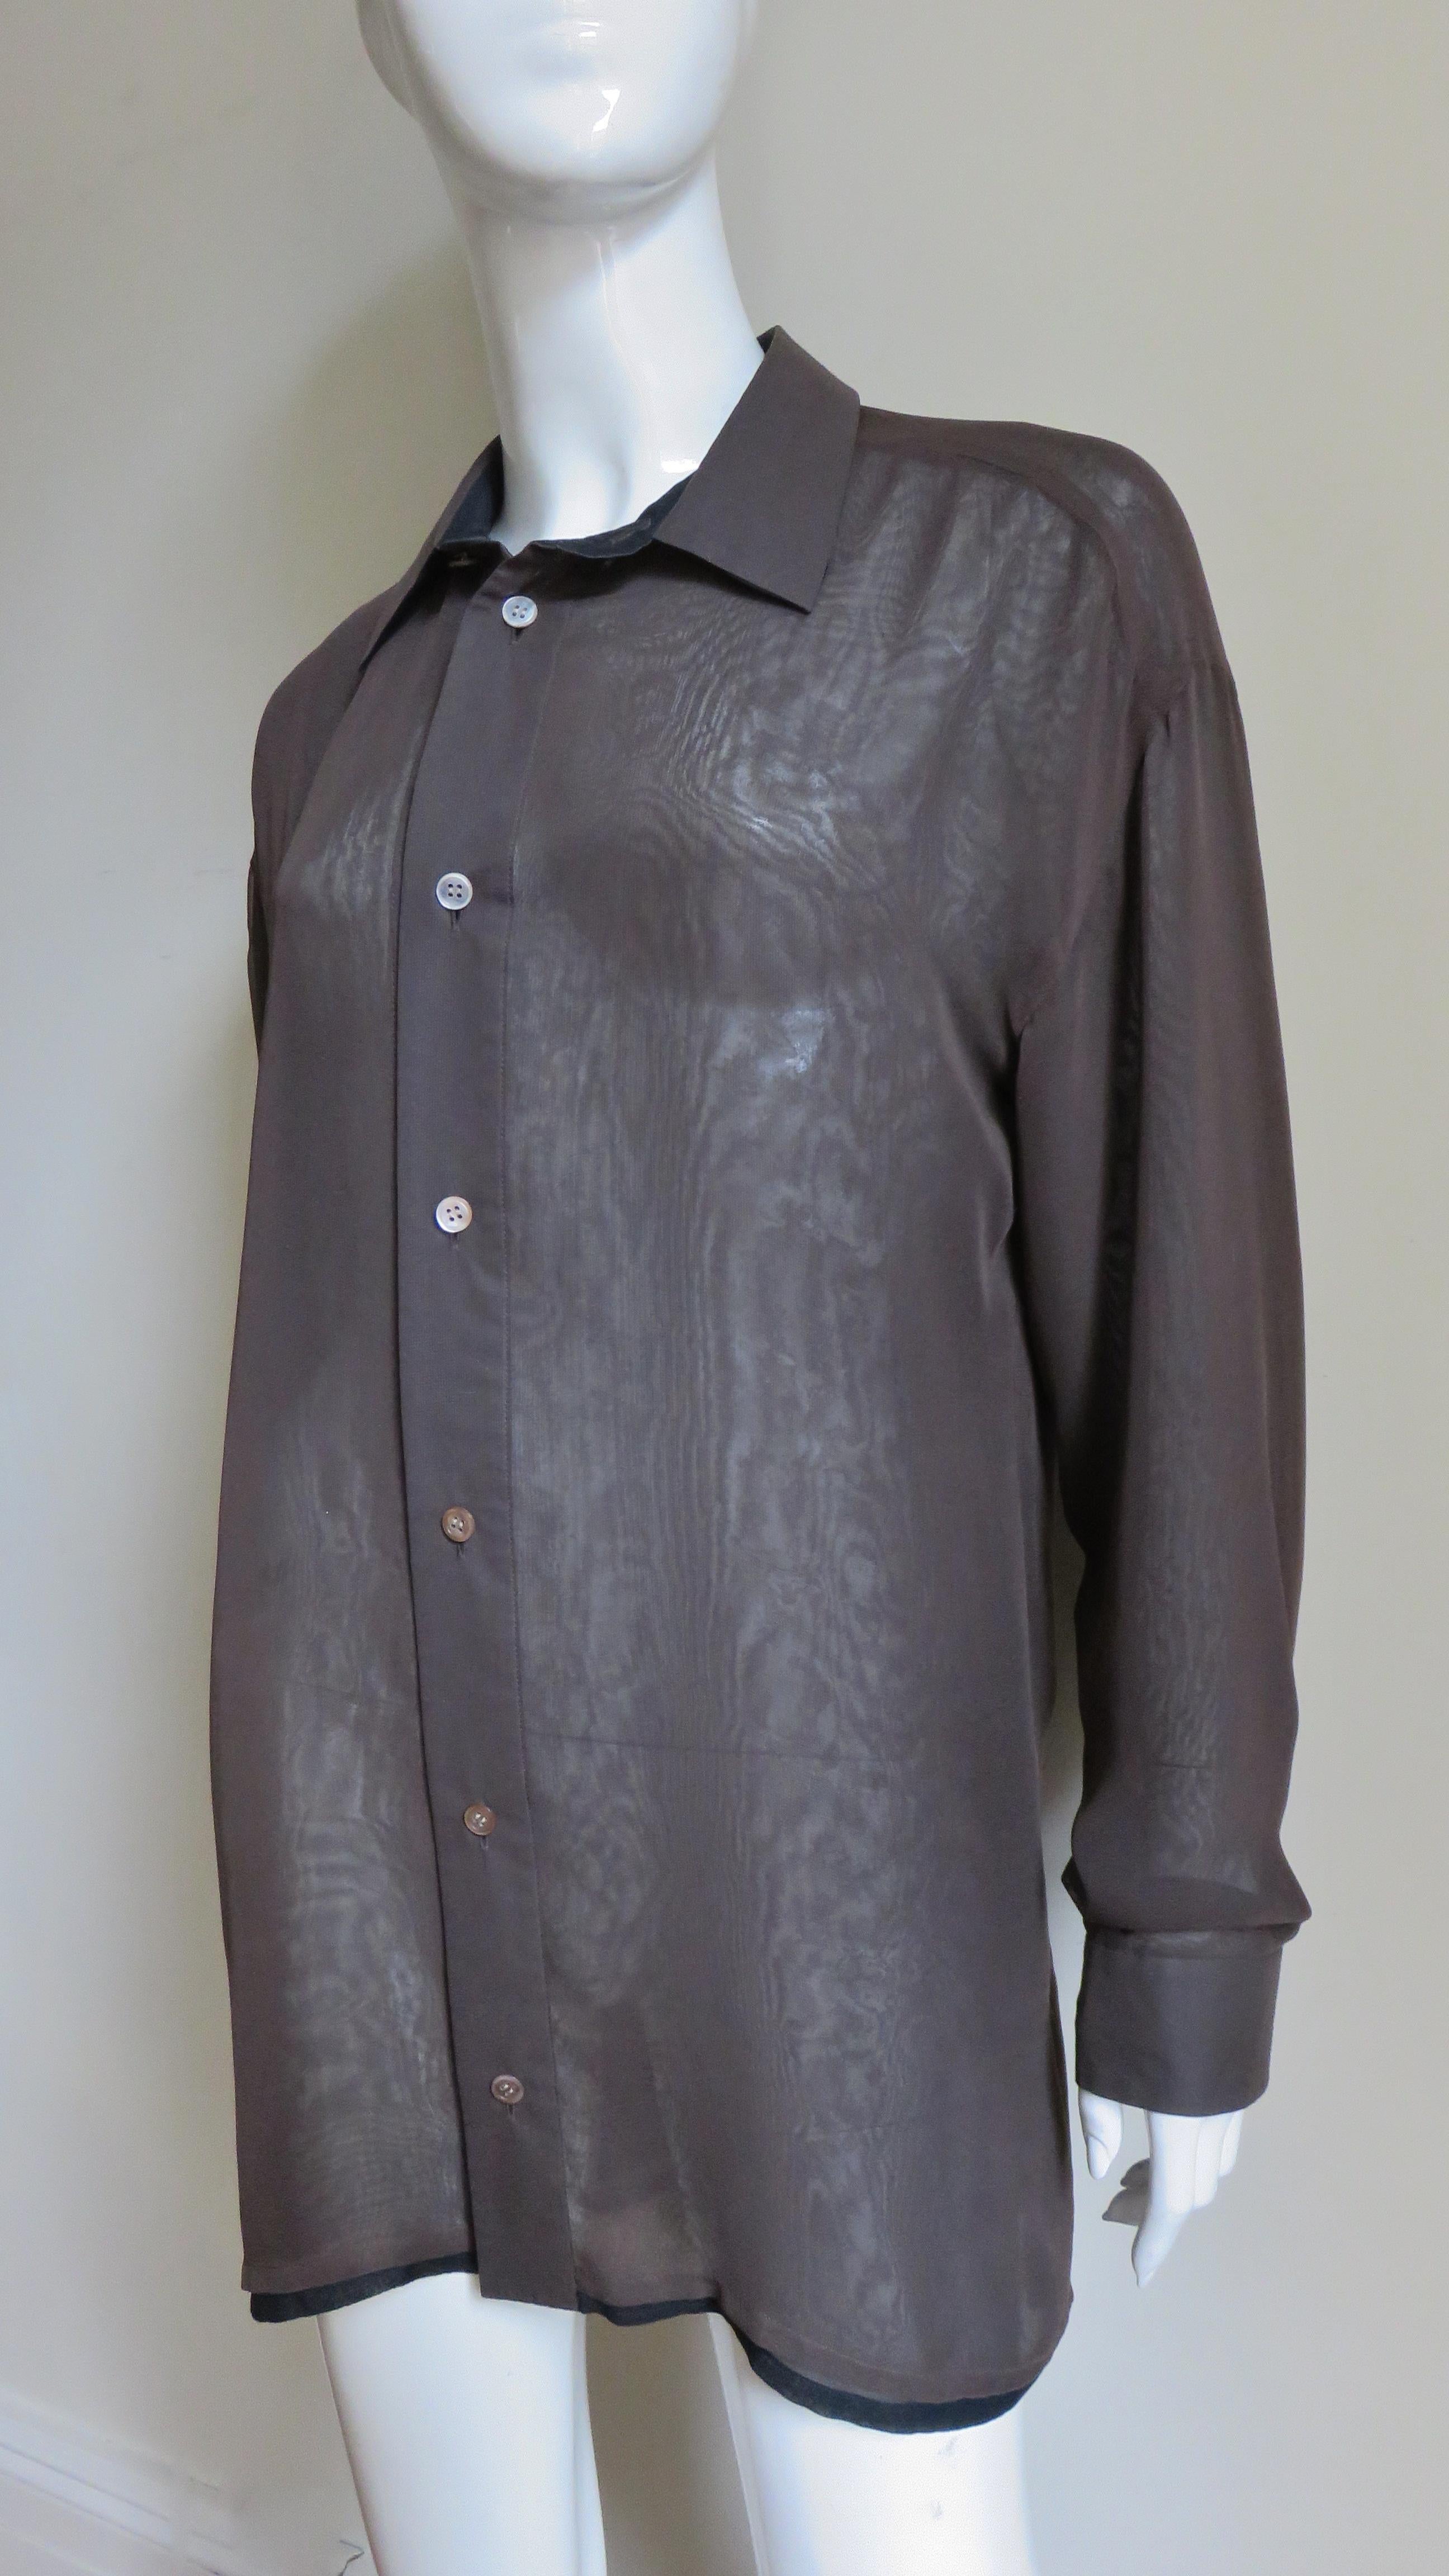  Issey Miyake Double Layer Shirt In Excellent Condition For Sale In Water Mill, NY